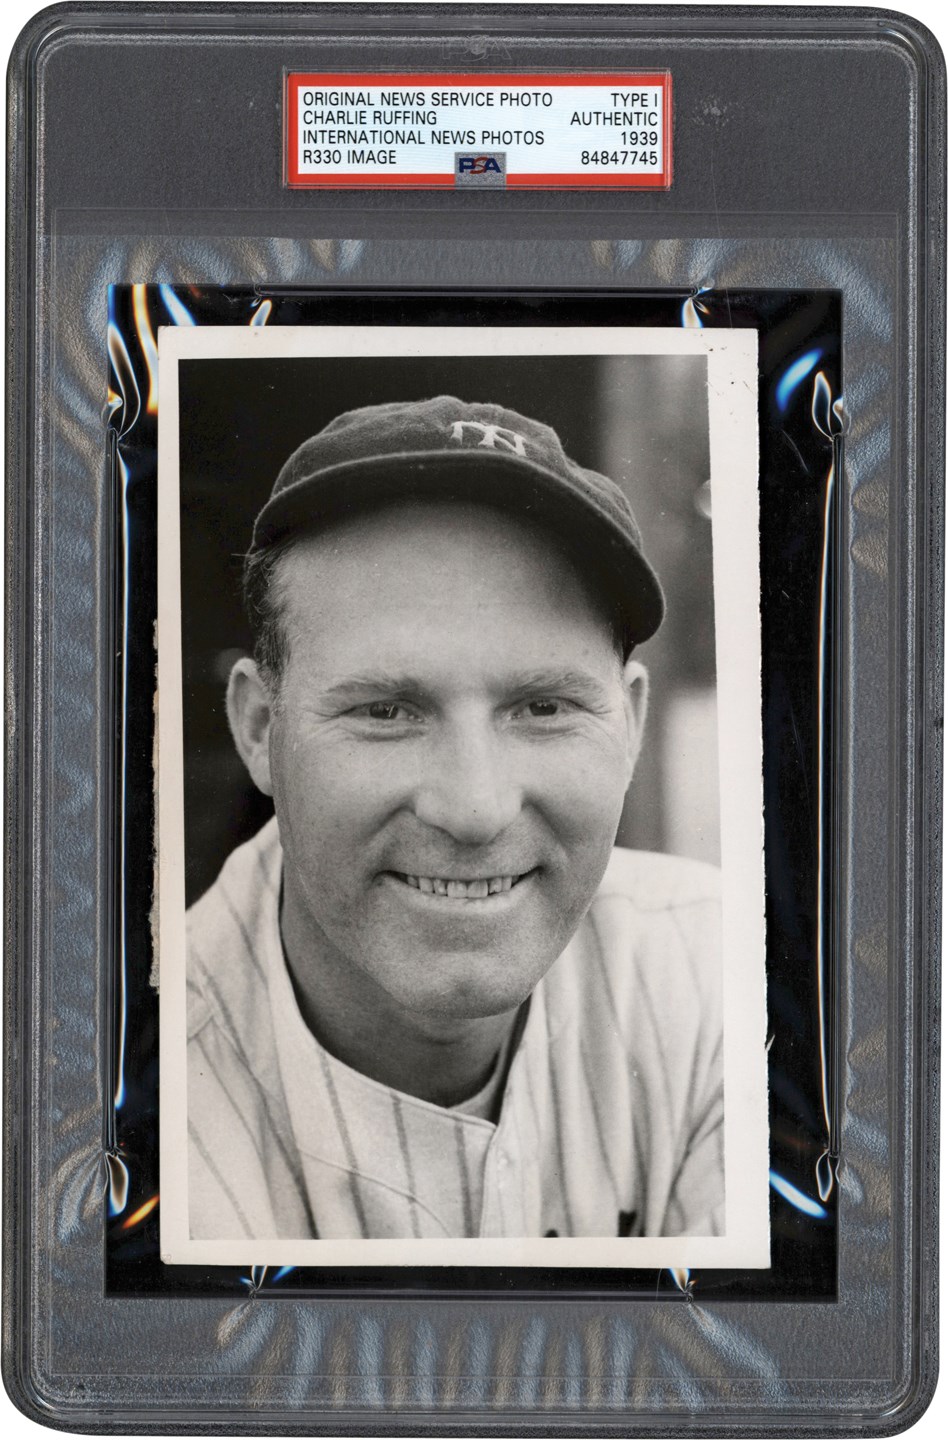 Vintage Sports Photographs - Red Ruffing Photograph Used For His 1941 Double Play Baseball Card (PSA Type I)